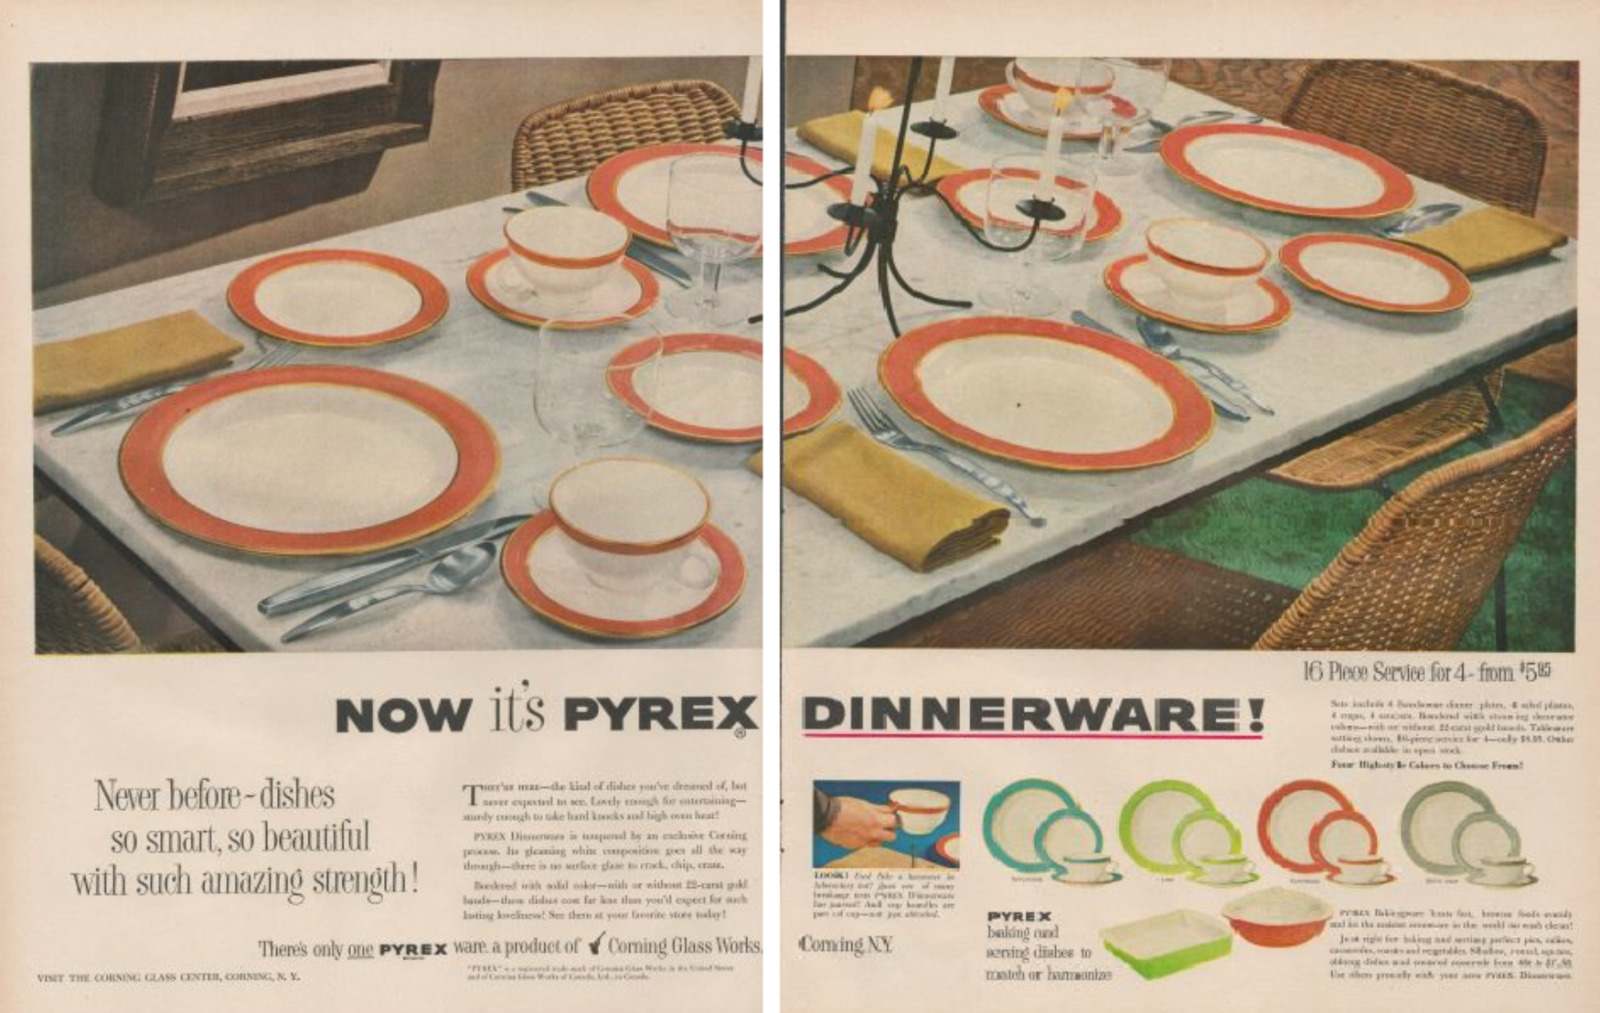 1953 Pyrex Dinnerware 16 Piece Service for 4 High Style Colors Print Ad 2 Page